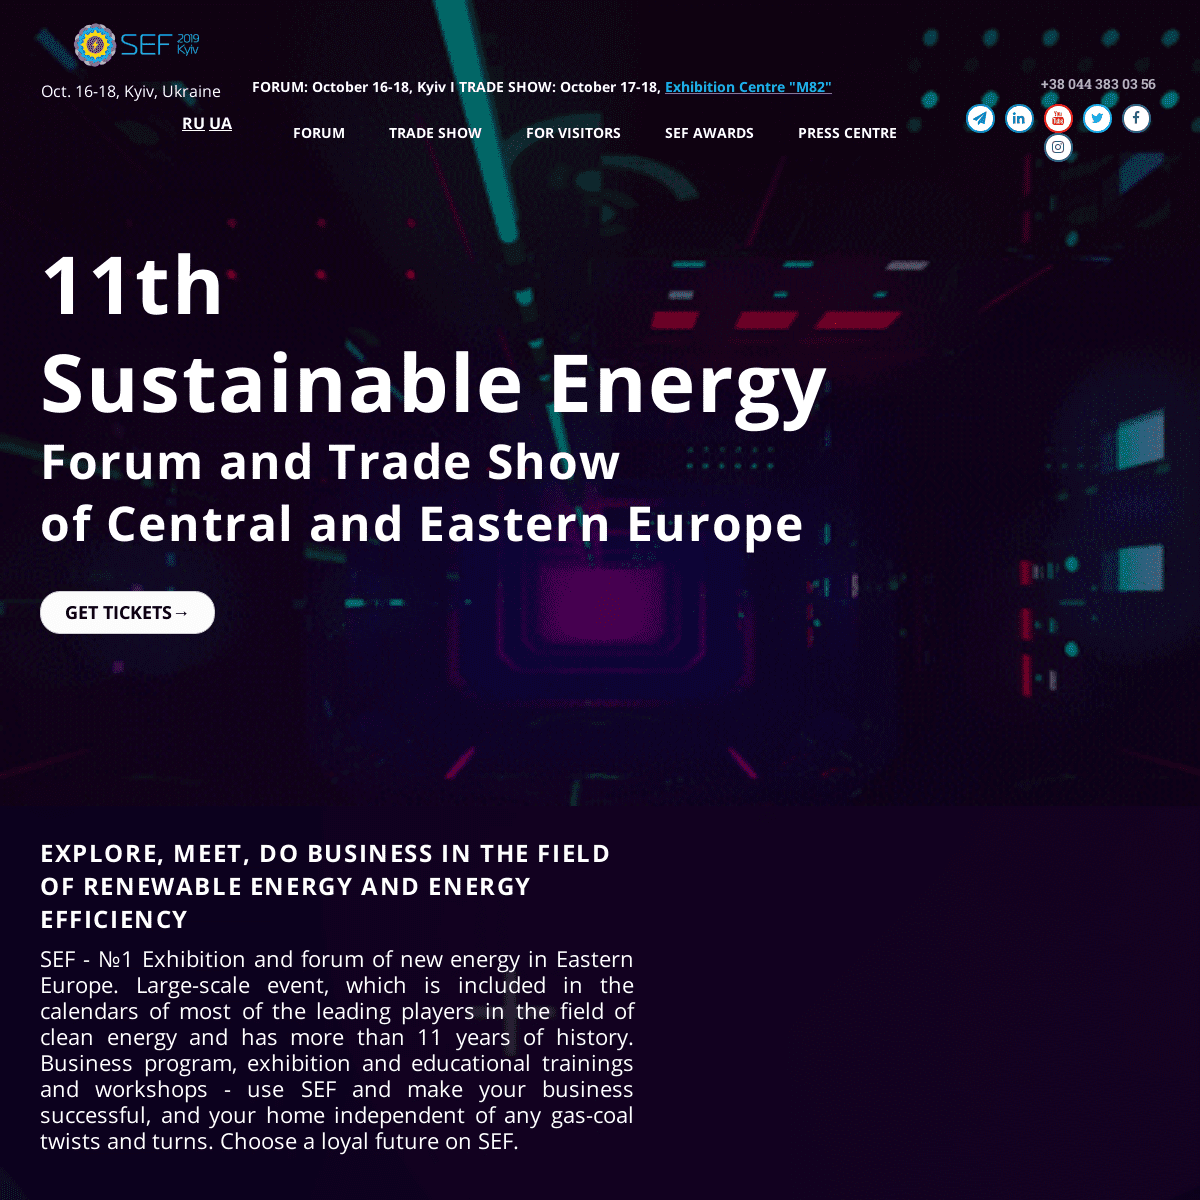 SEF 2019 KYIV - SUSTAINABLE ENERGY FORUM AND TRADE SHOW